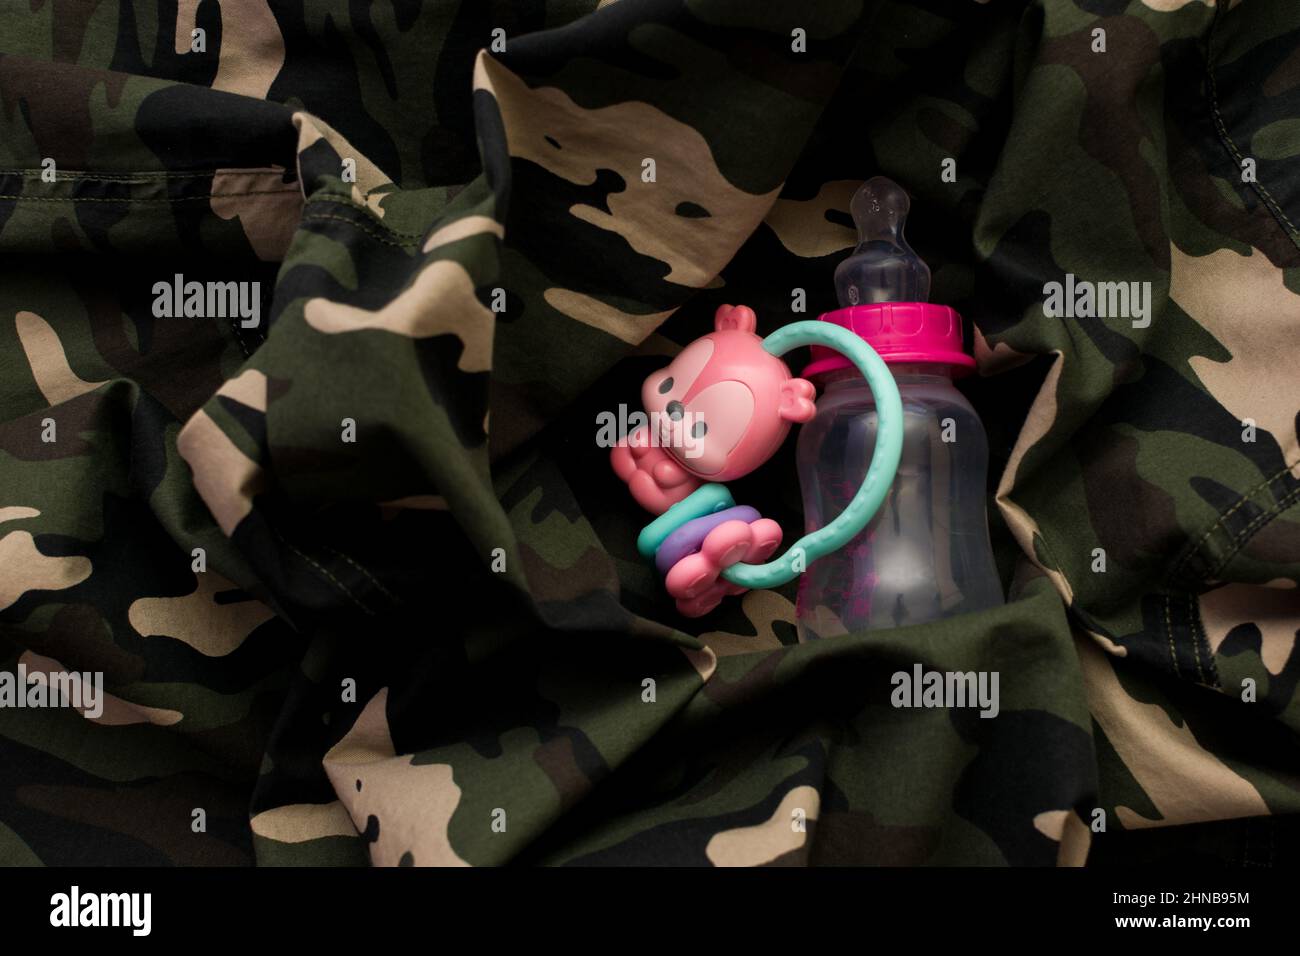 Rattle toy and baby bottle on military uniform, top view. Love and war concept Stock Photo